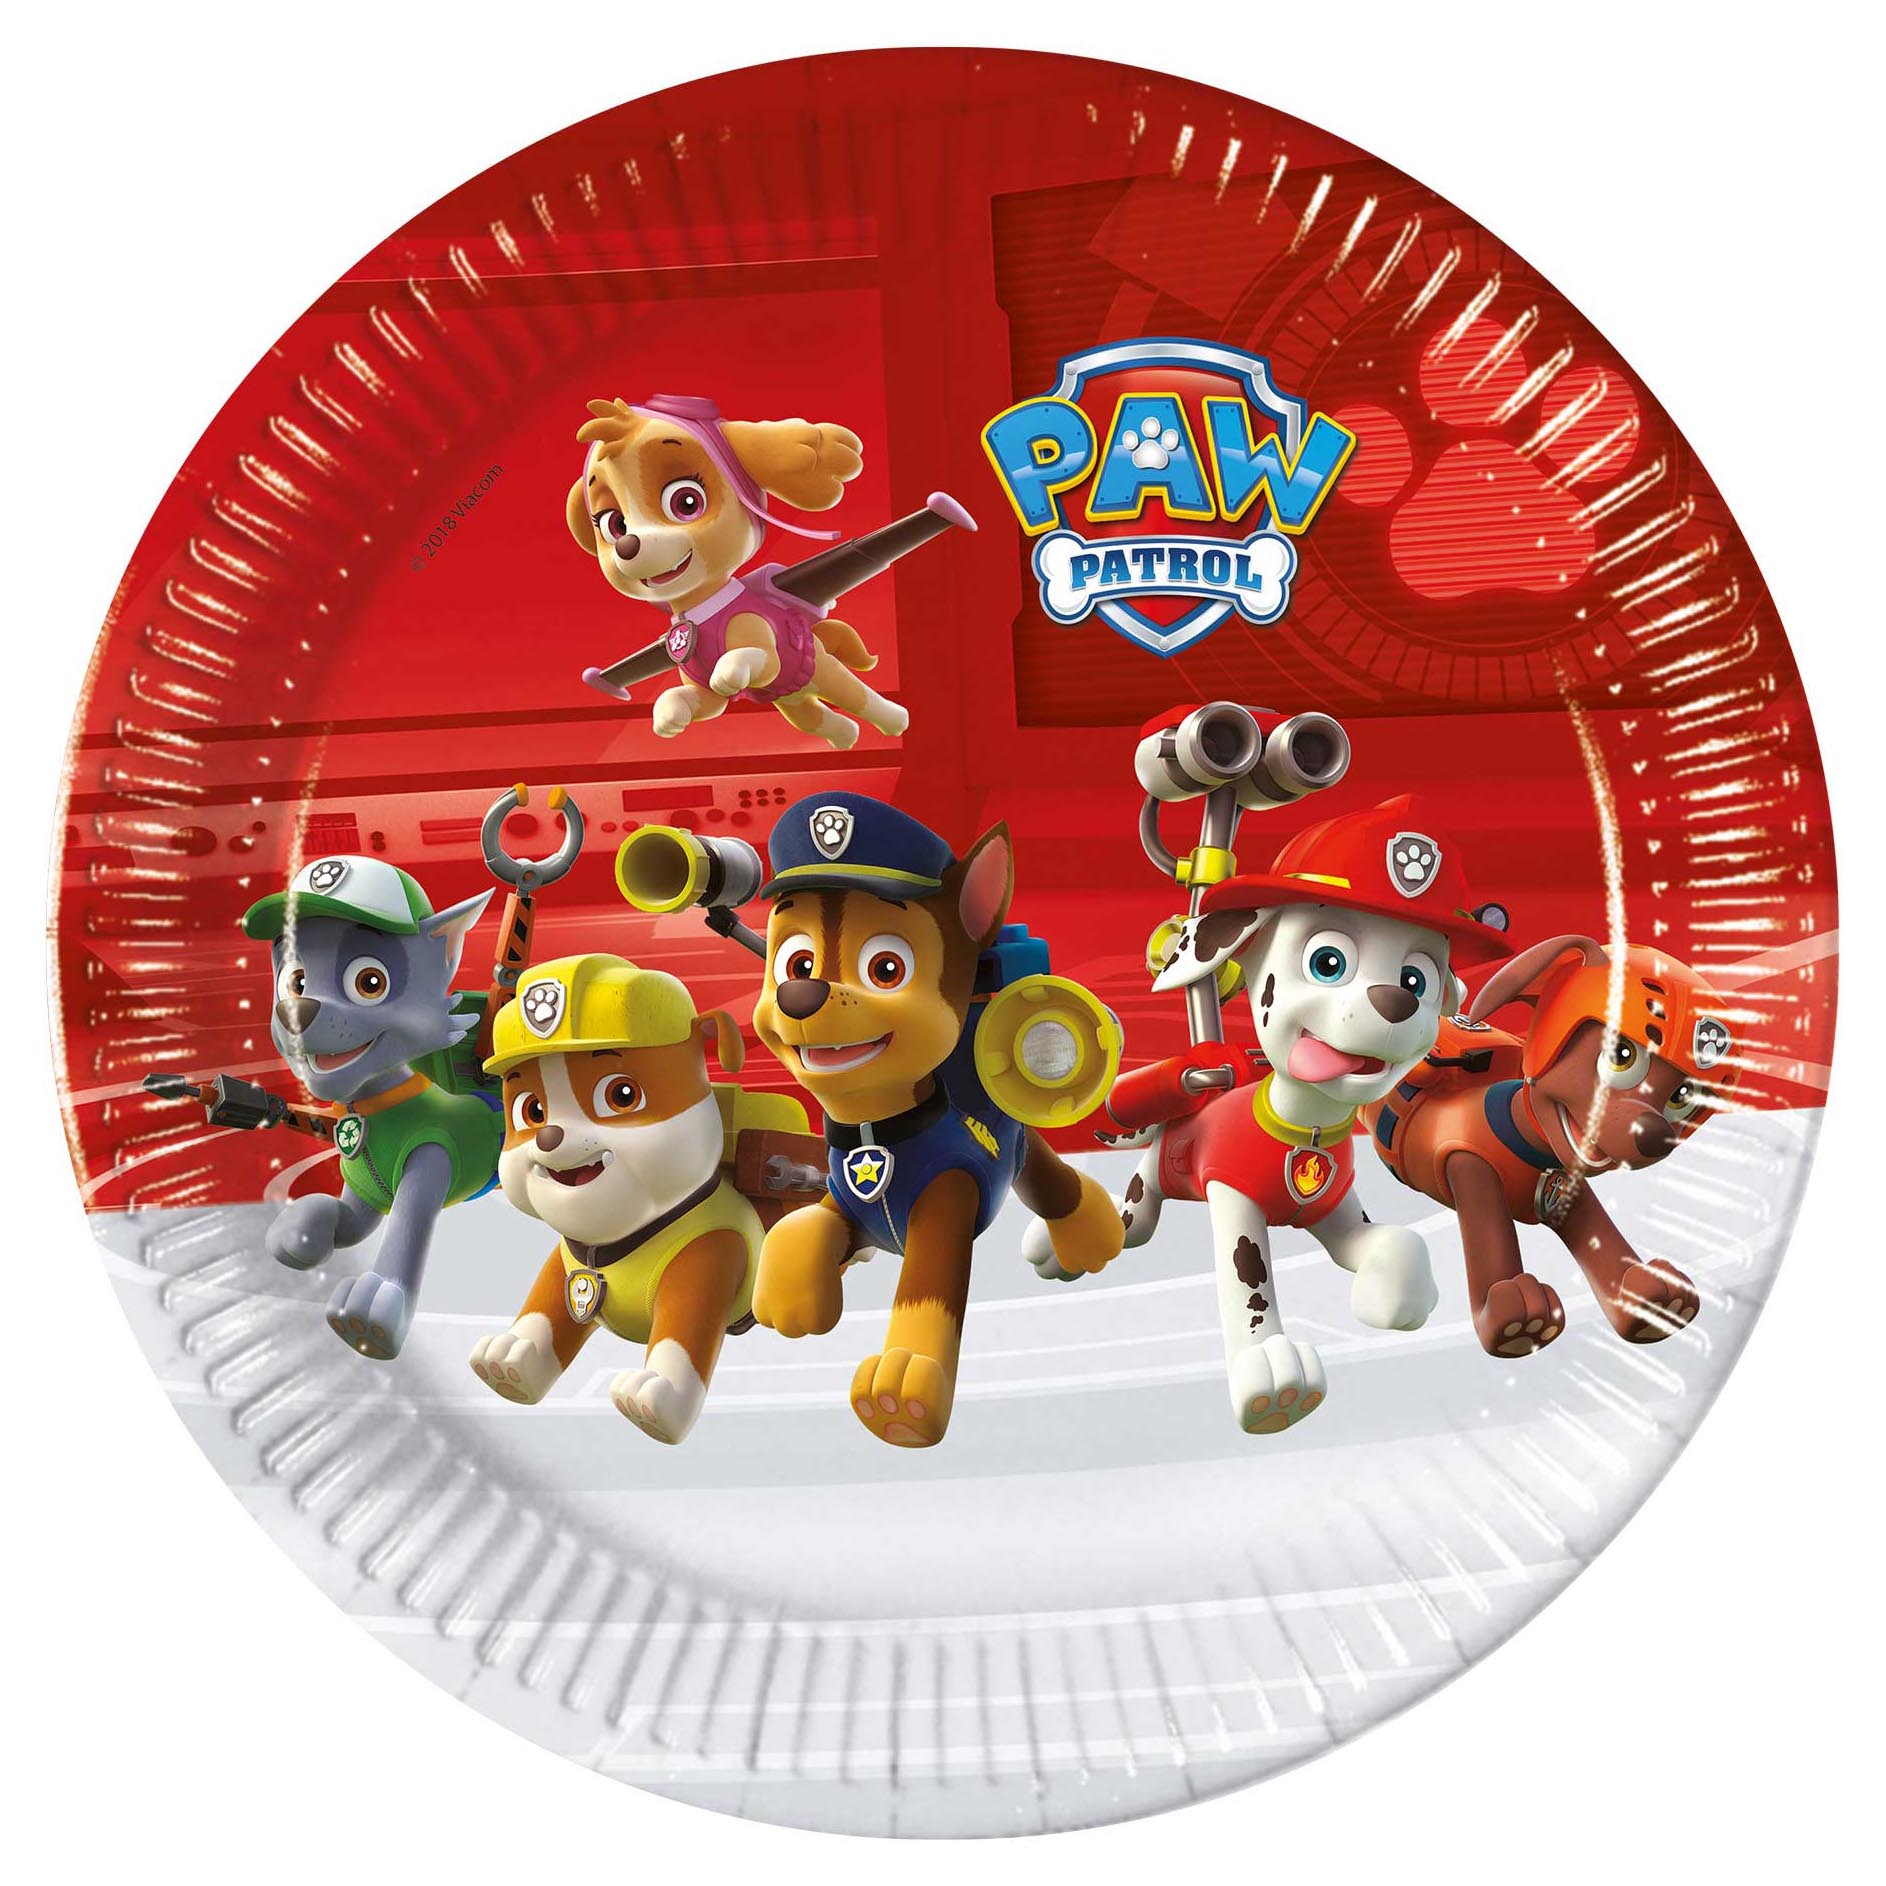 Paw Patrol Ready for Action Party Tableware & Decorations Bundle - 16 Guests